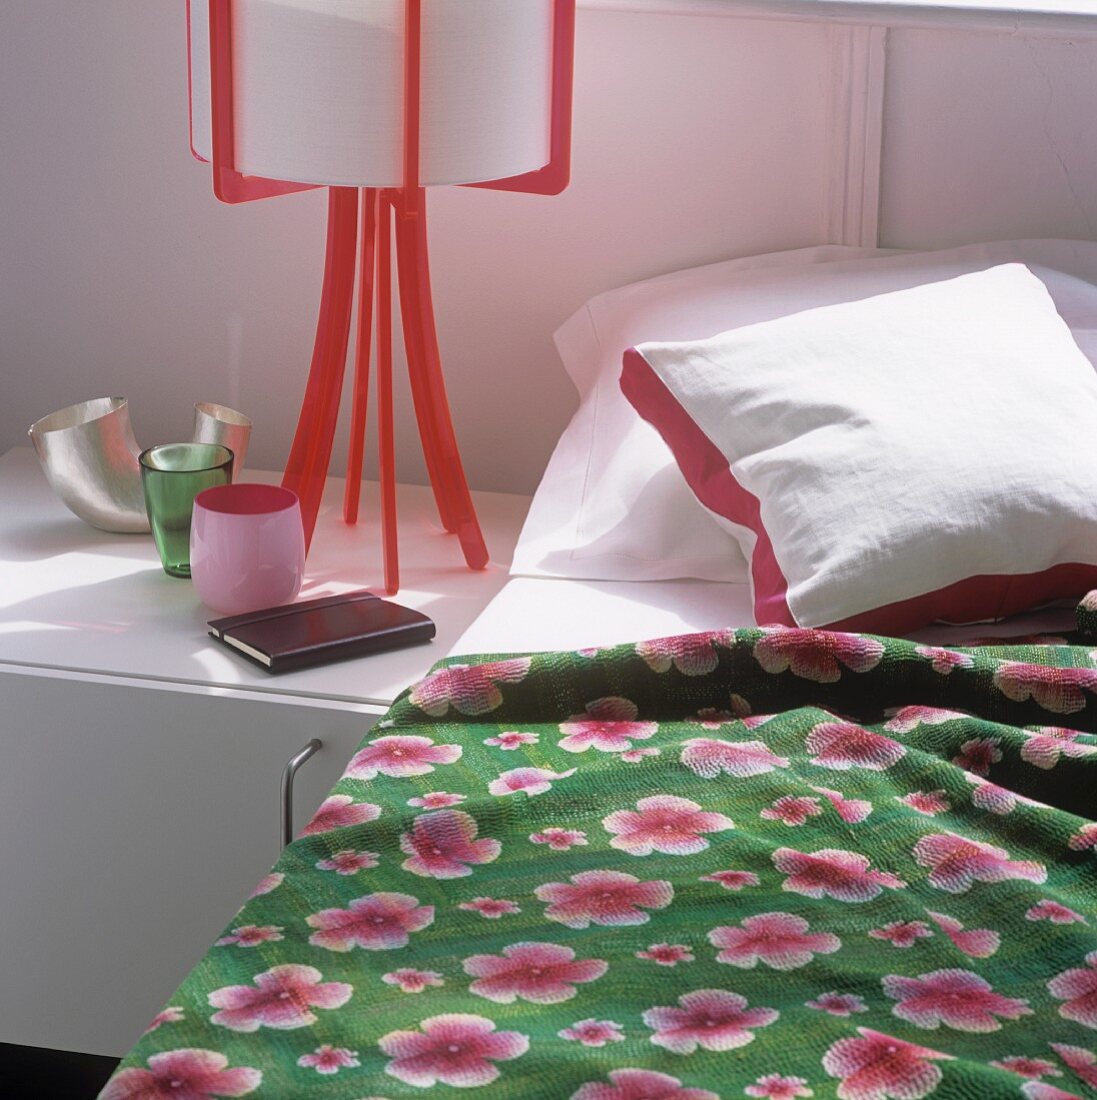 A bed with a floral patterned quilt and a table lamp with a red plastic base on a bedside table